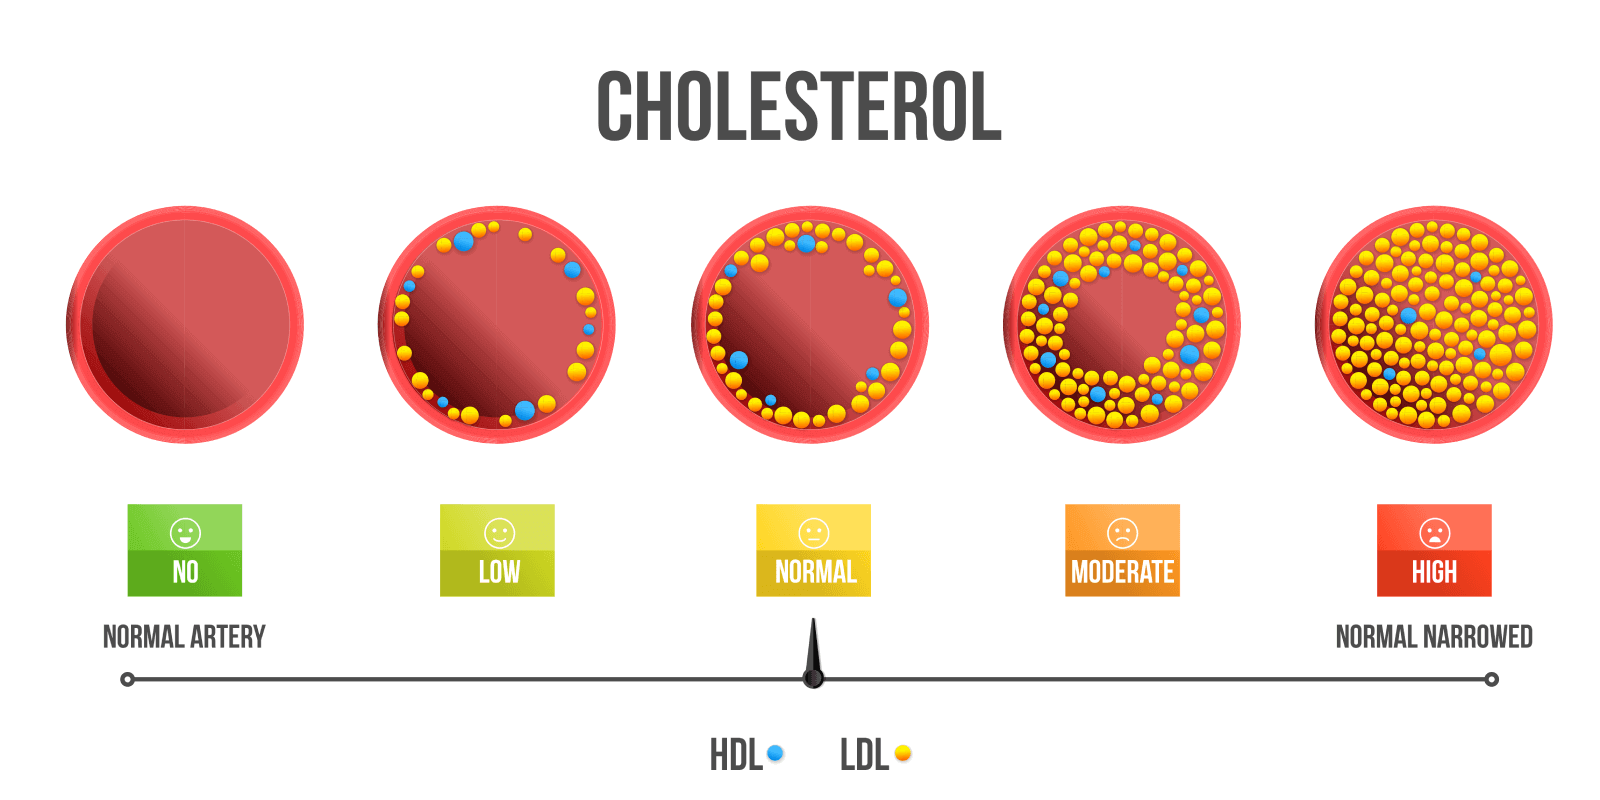 High Cholesterol: Overview, Types,Symptoms, Causes, Levels, & More